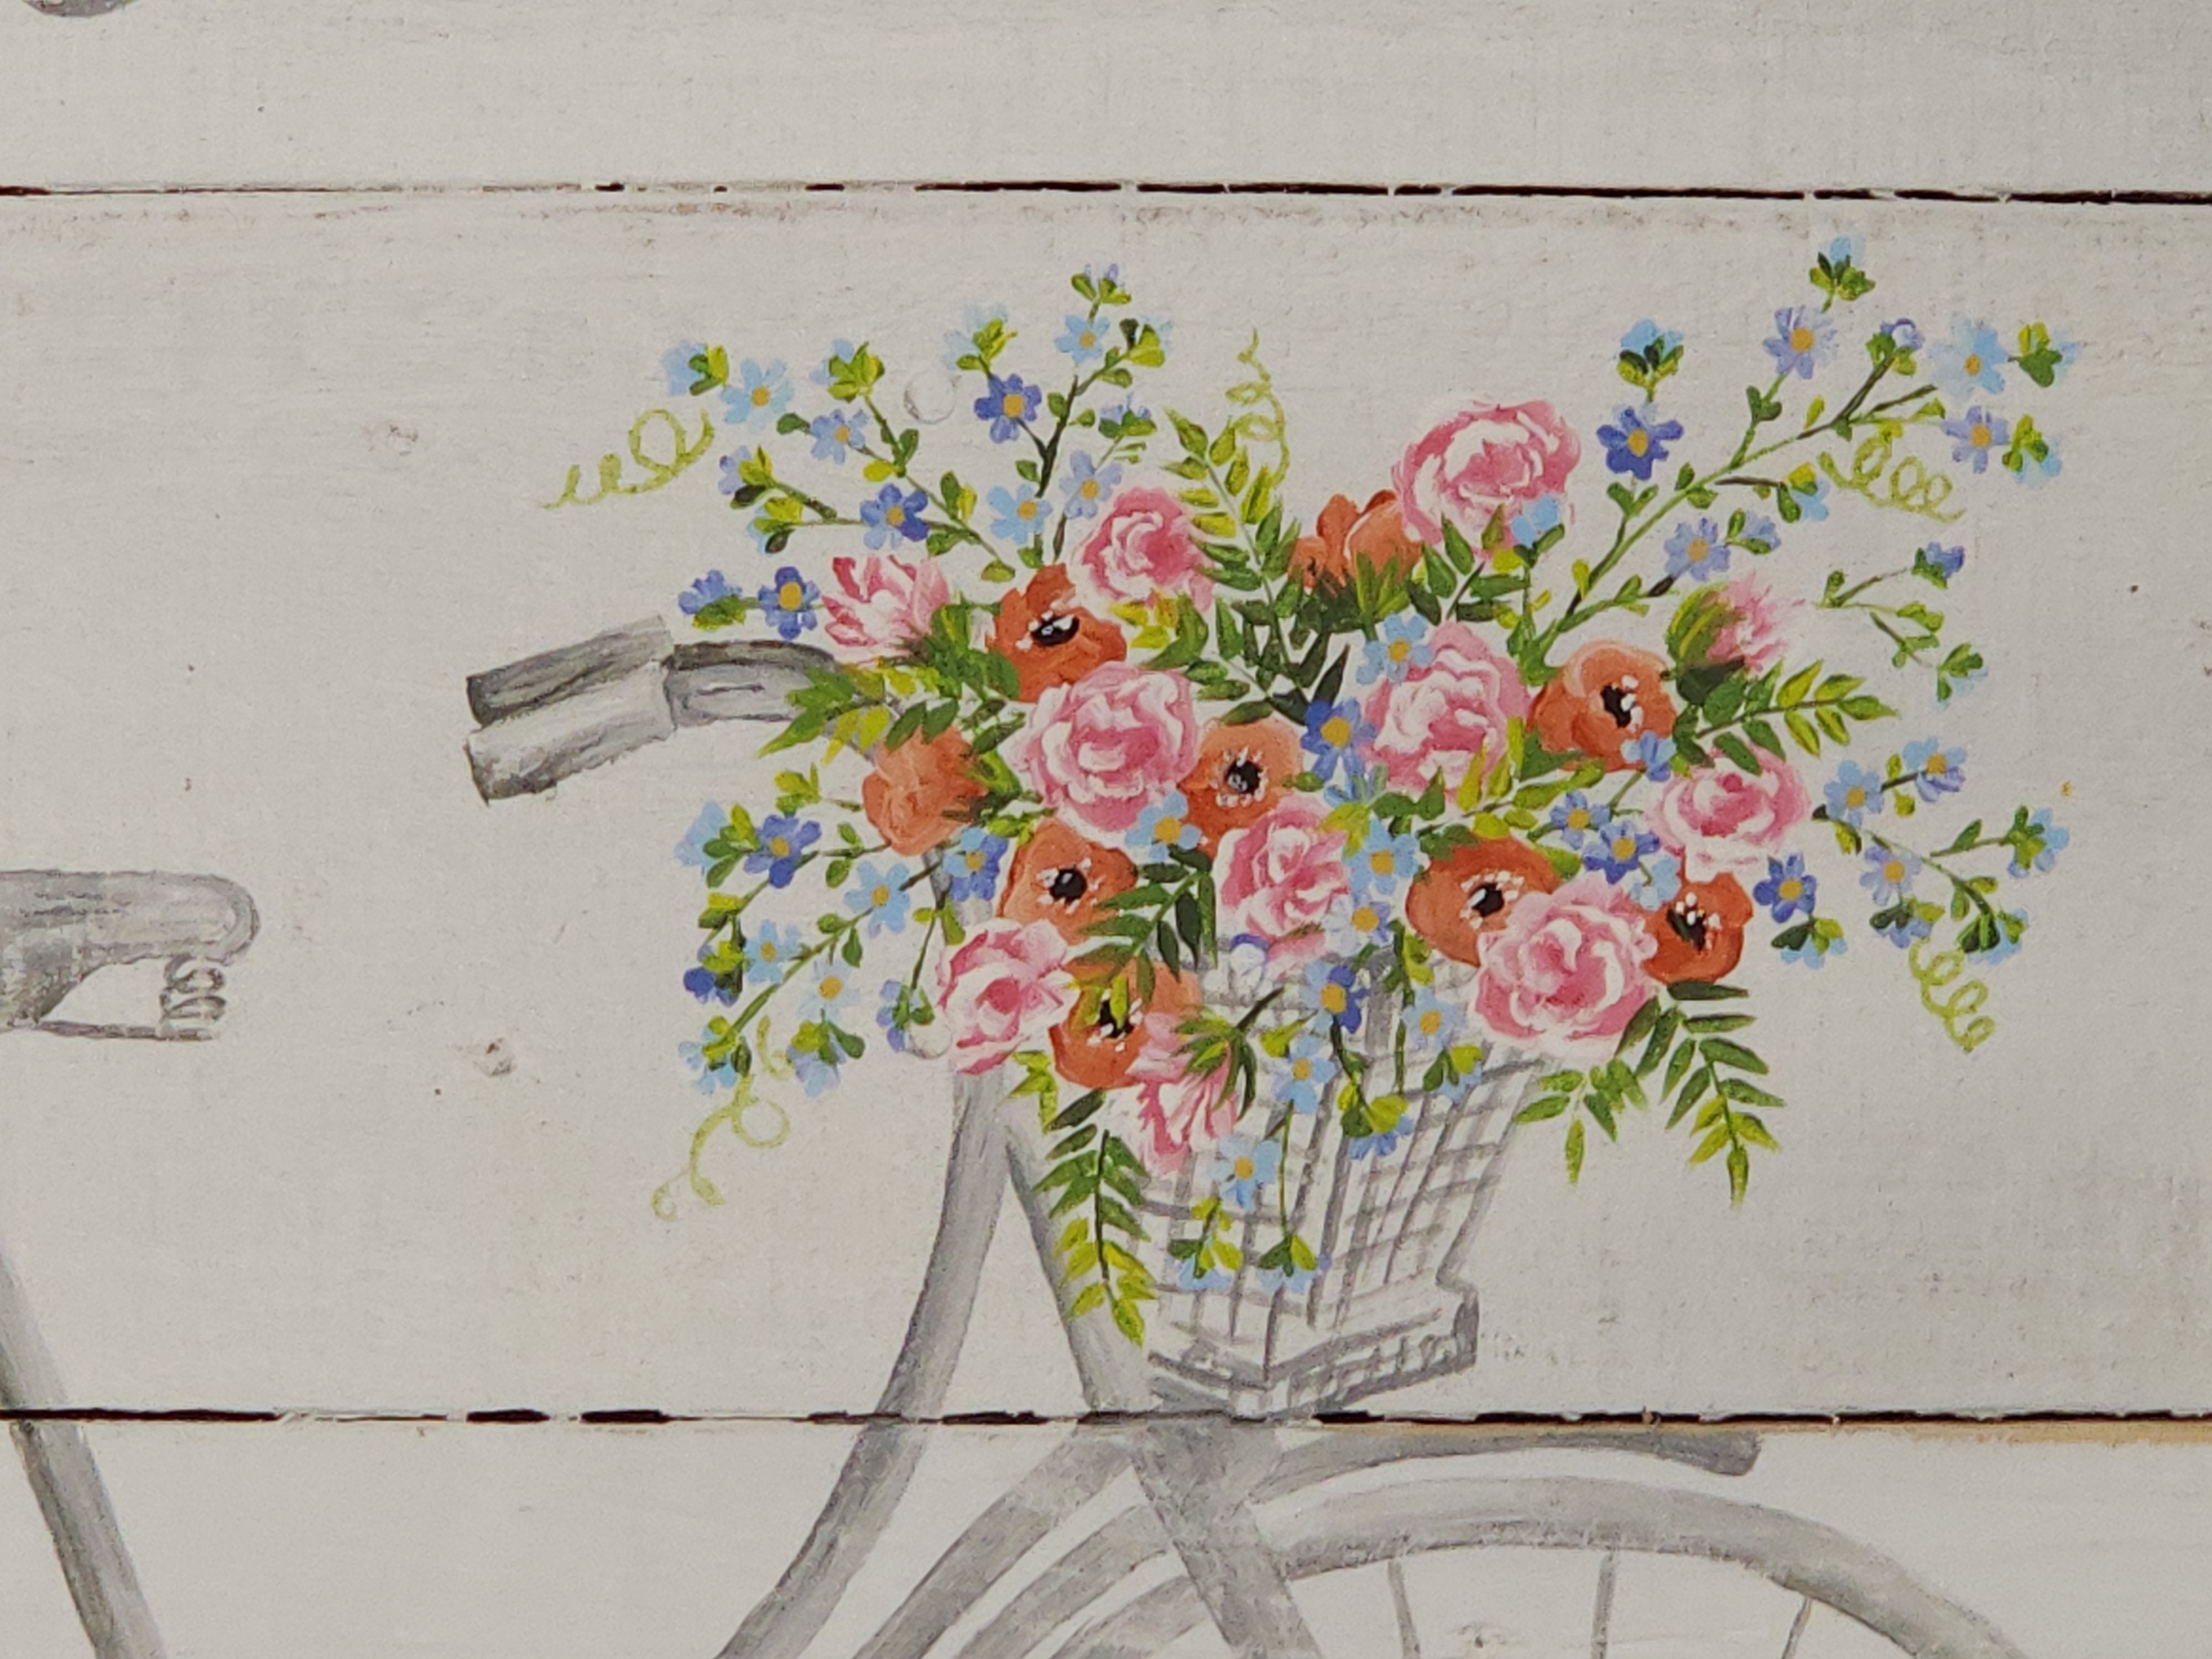 White washed Farmhouse flower decor, hand painted Antique bike with basket of spring flowers on pallet wood